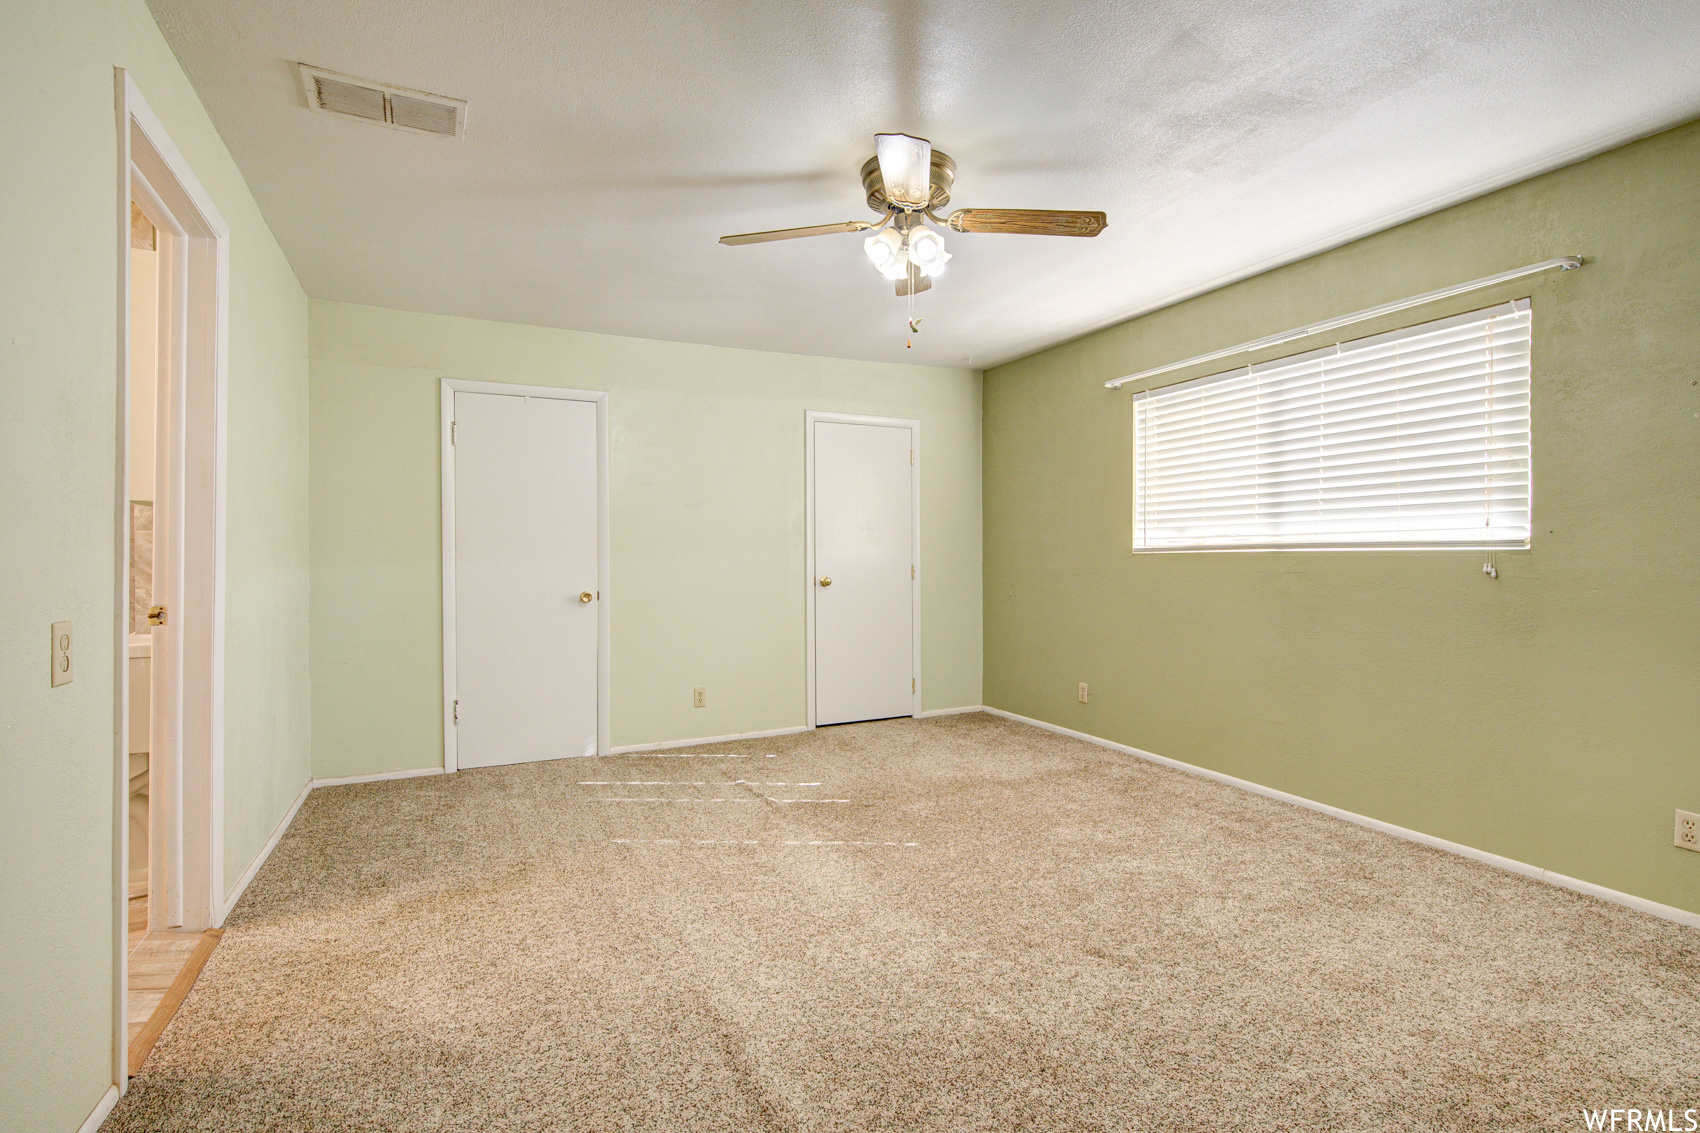 Unfurnished bedroom featuring light carpet, multiple closets, and ceiling fan